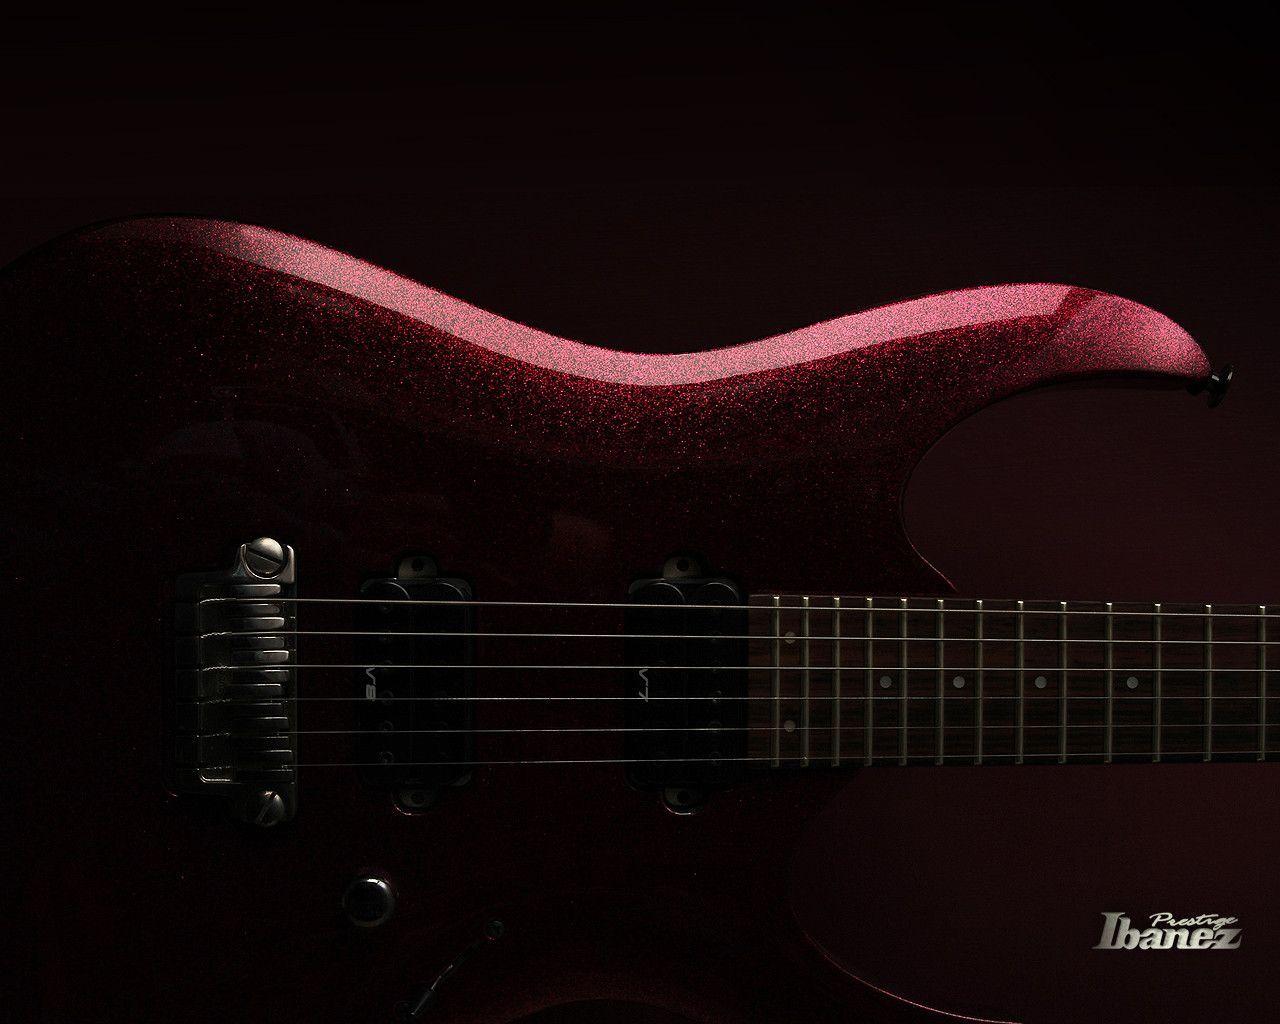 Ibanez Red Music Wallpaper